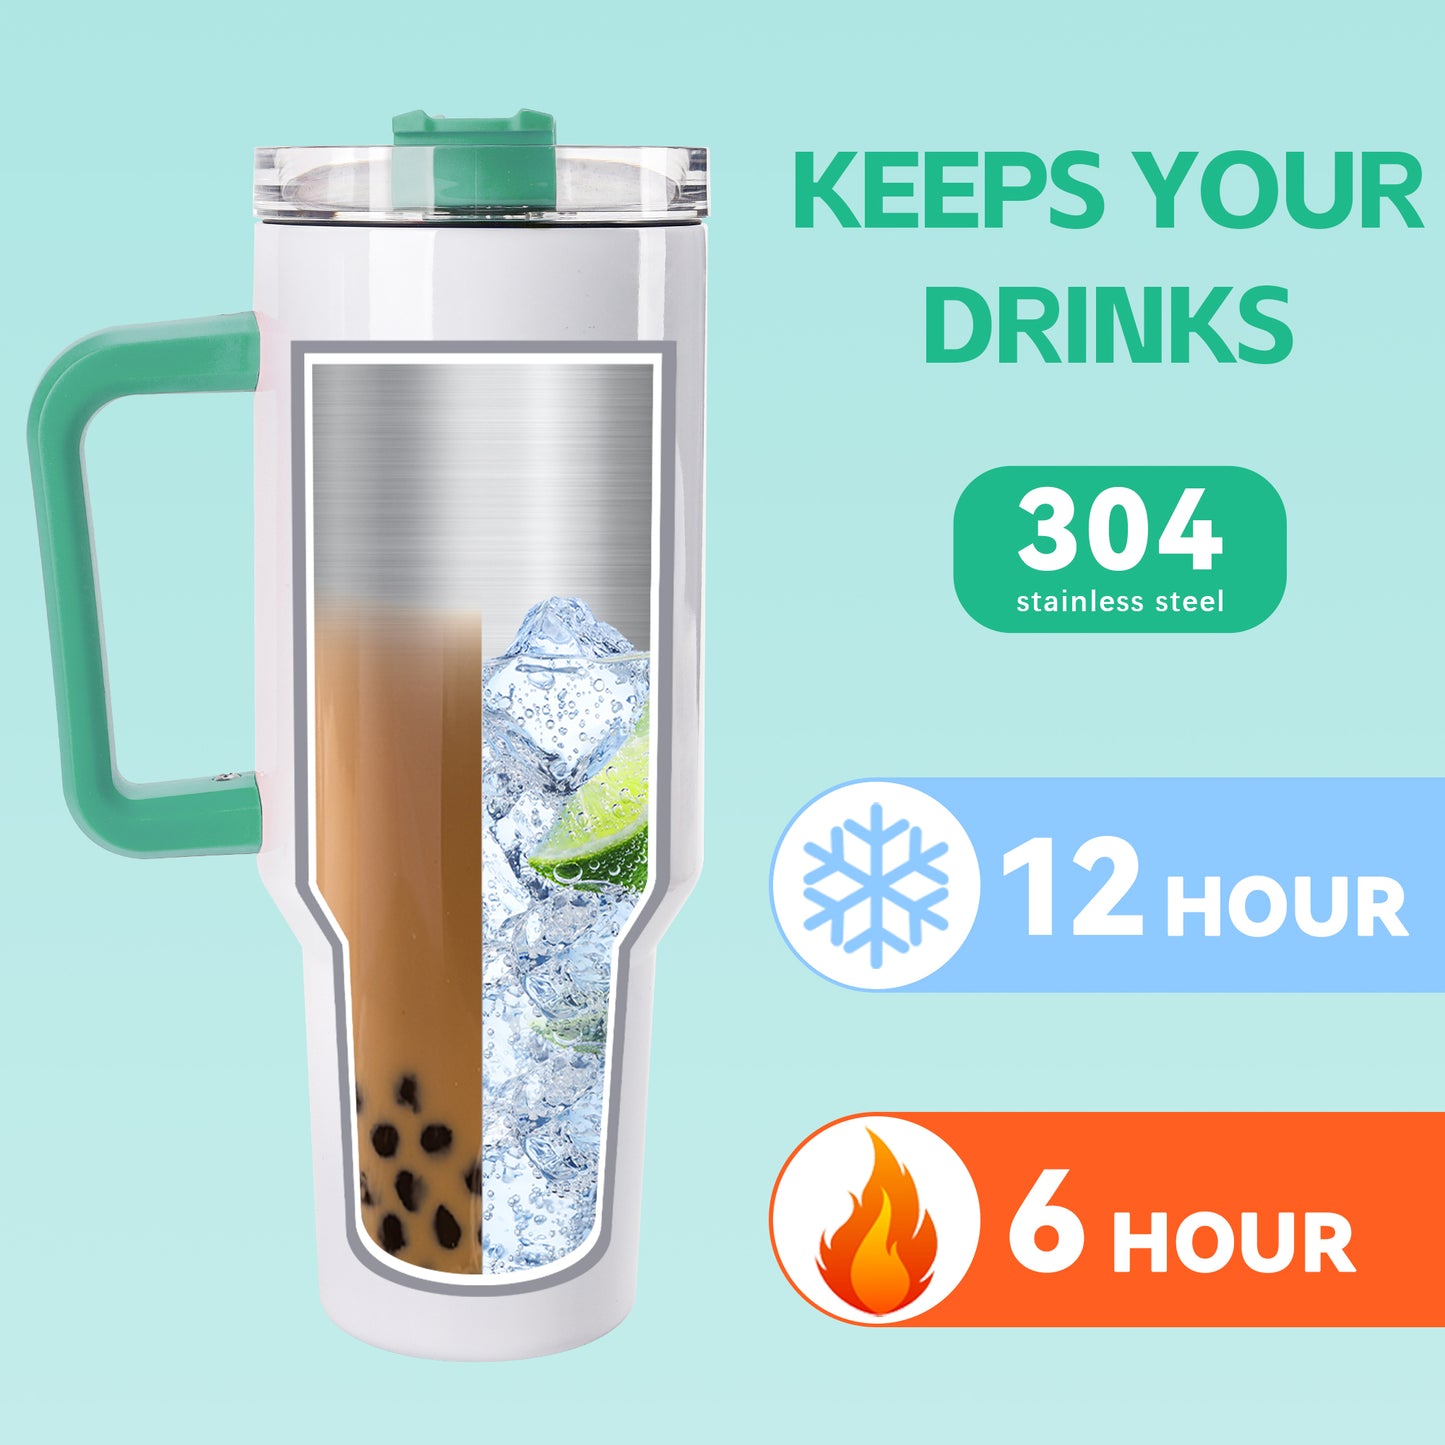 40 OZ Sublimation Tumblers with Green Handle